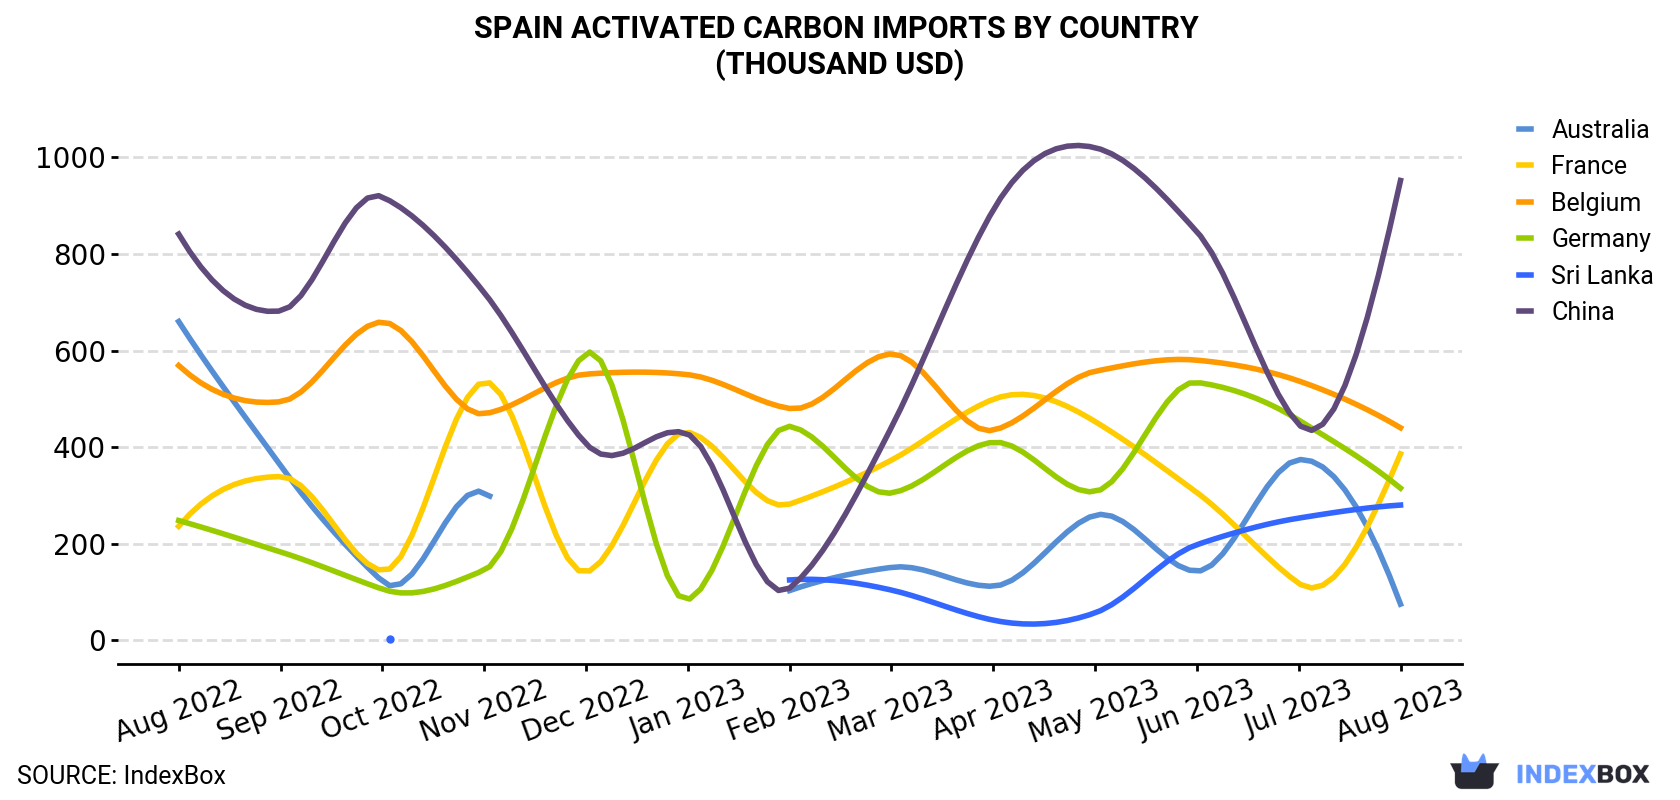 Spain Activated Carbon Imports By Country (Thousand USD)